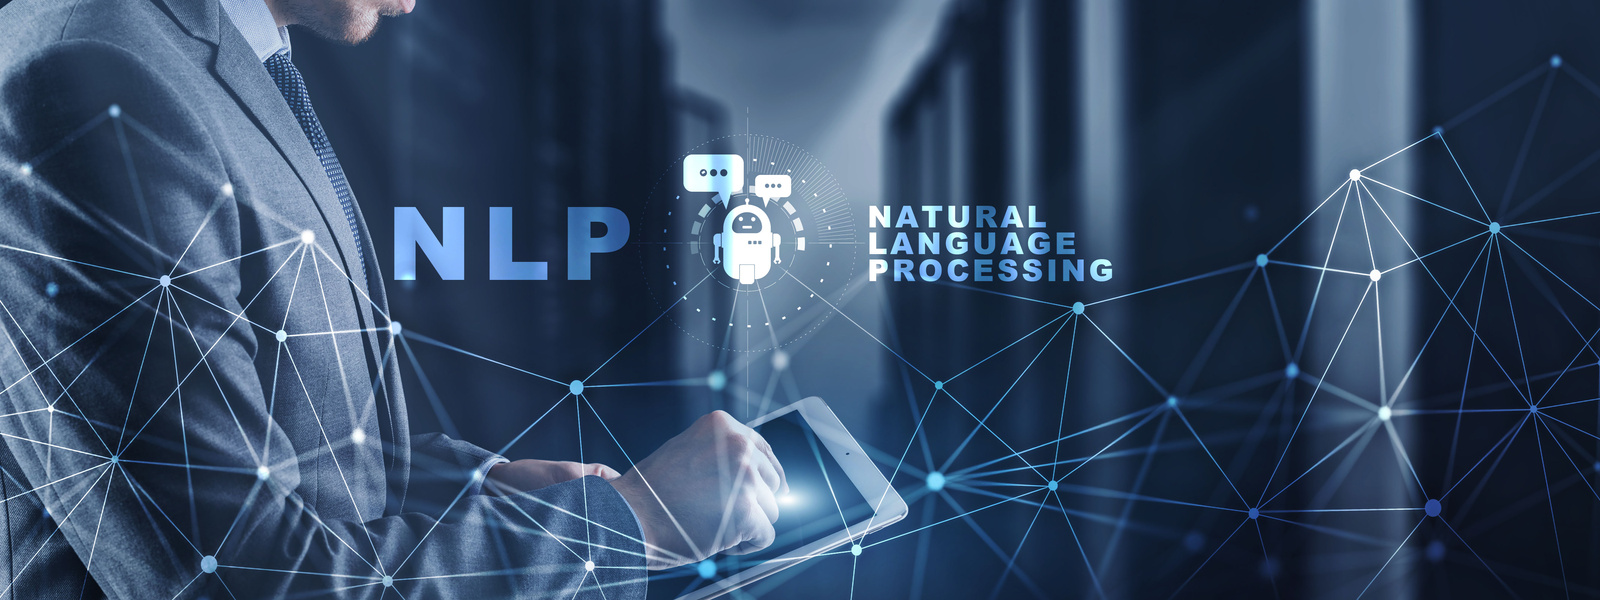 NLP natural language processing cognitive computing technology concept on blurred Server Room.